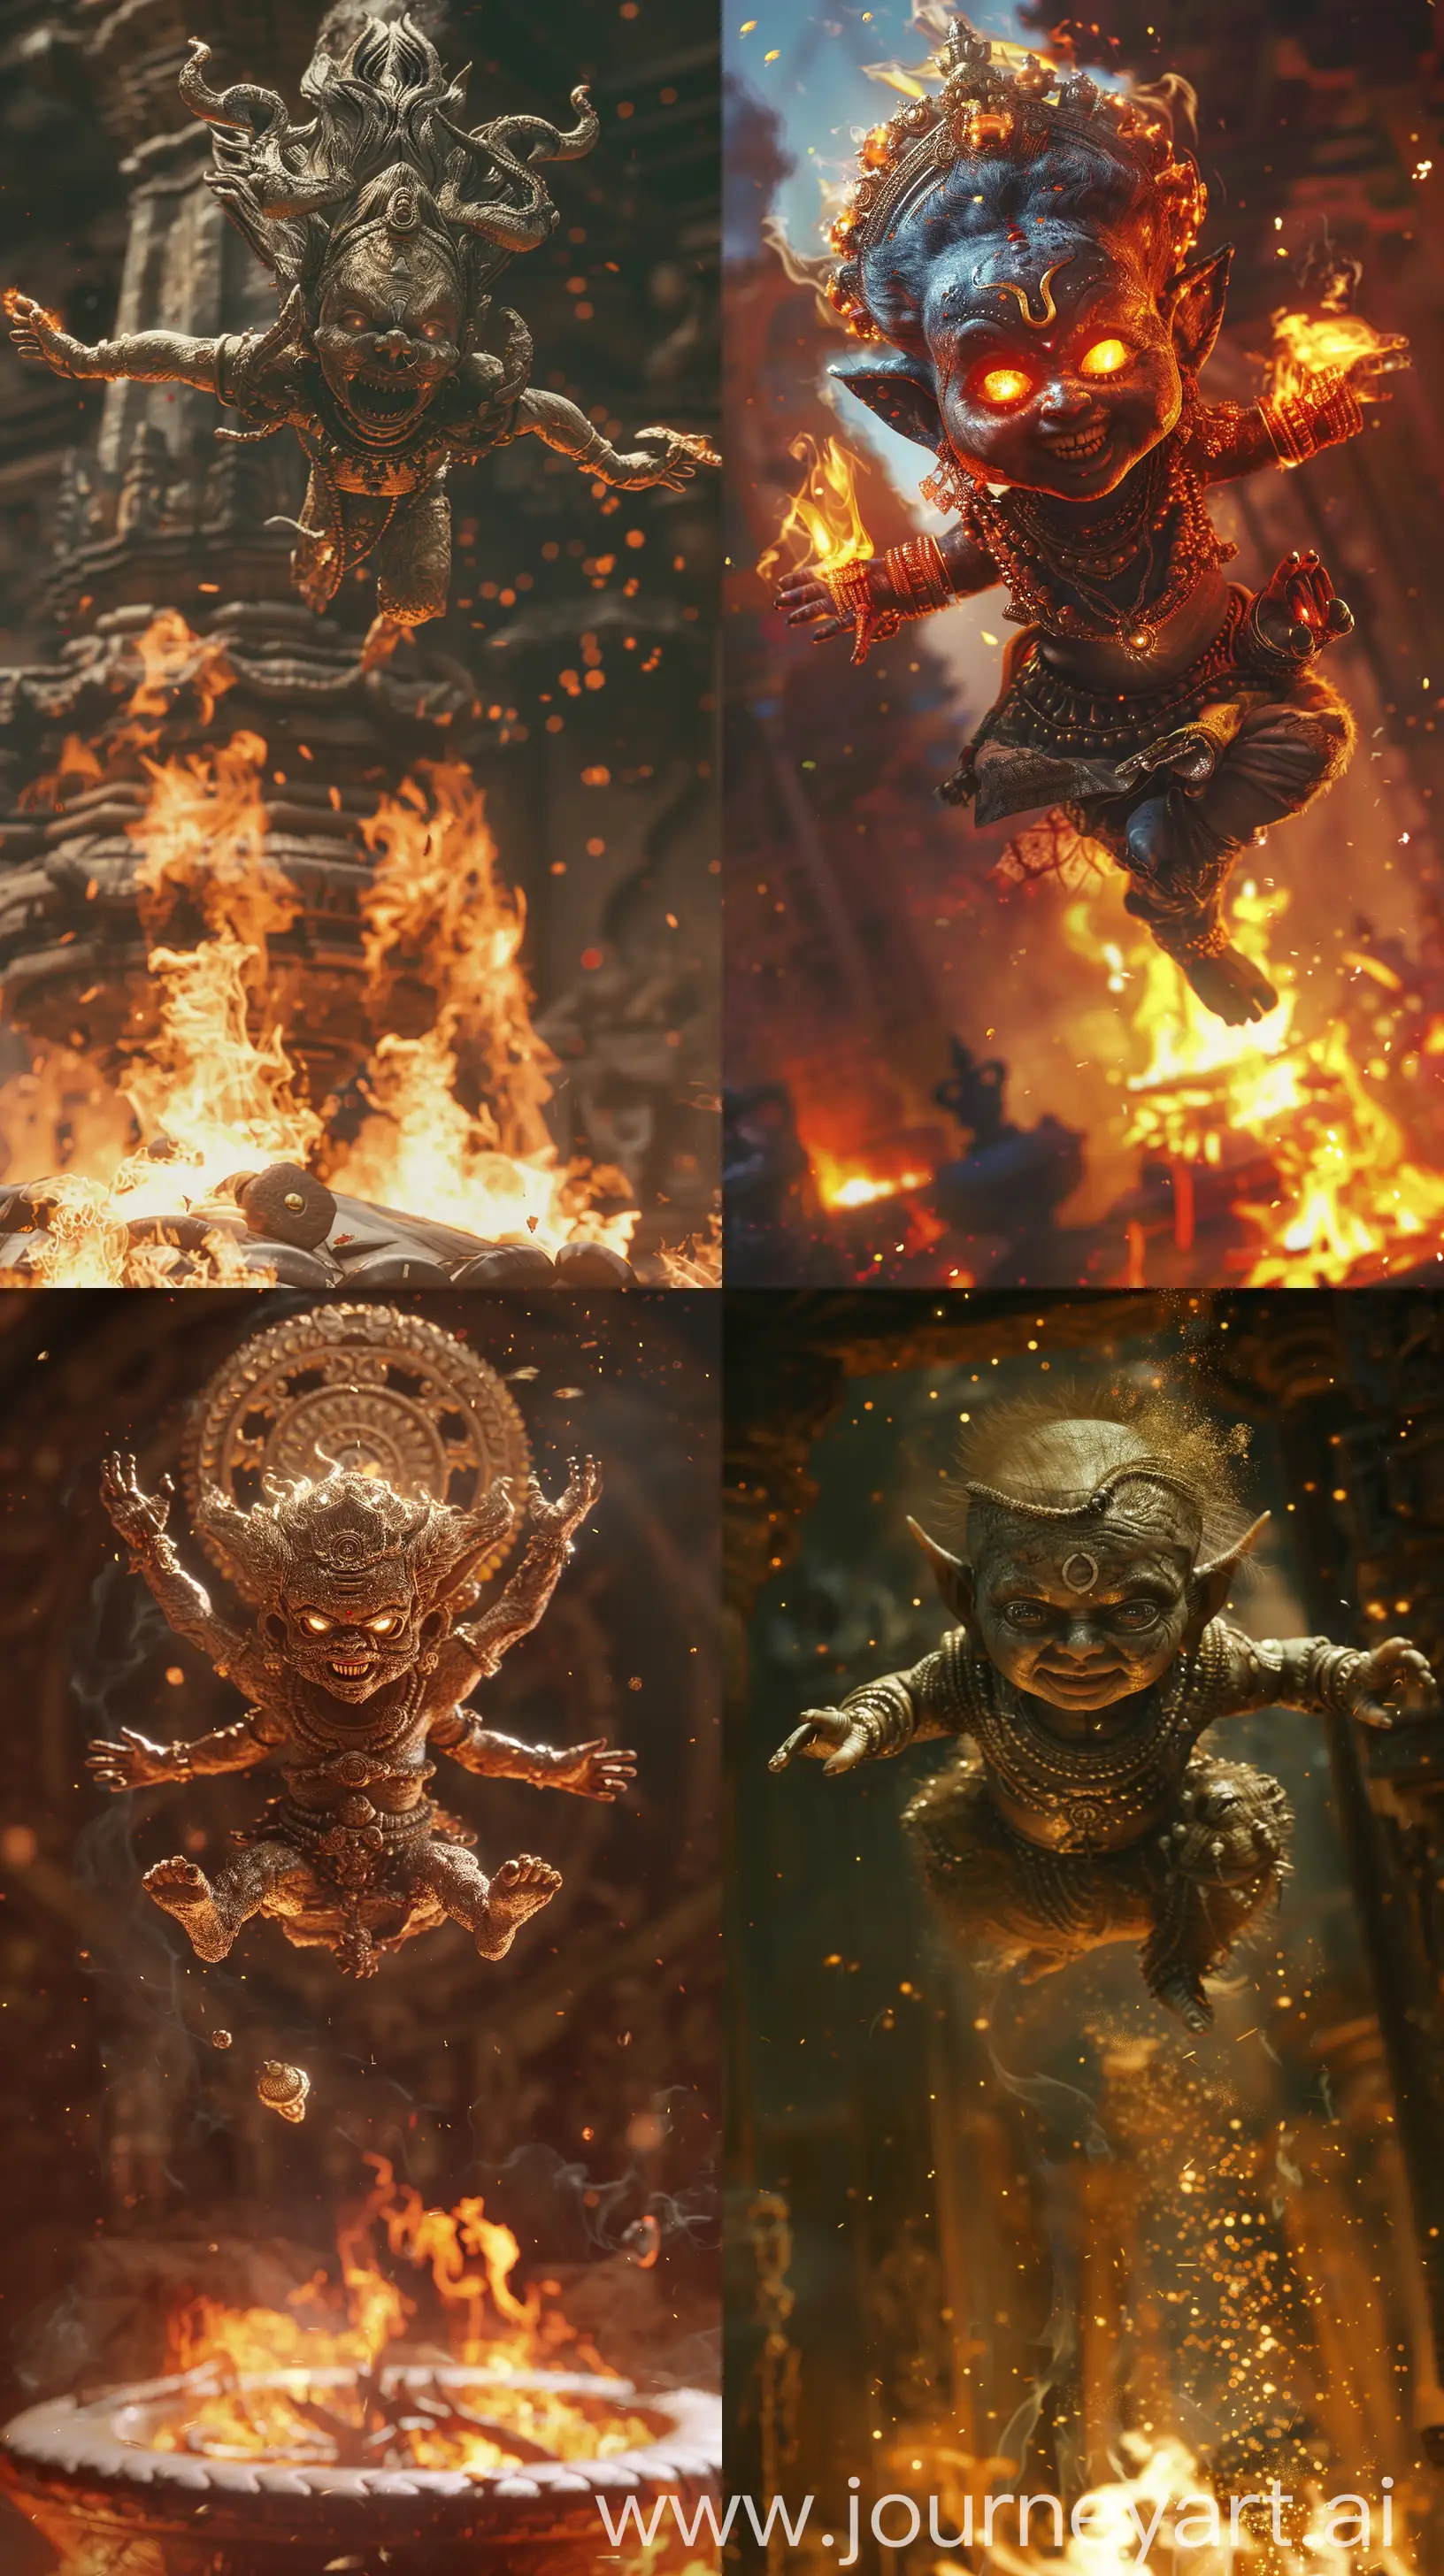 Images depicting a new born demon from ancient Indian times, floating above a funeral pyre, close-up image, intricate details, 8k quality images --ar 9:16 